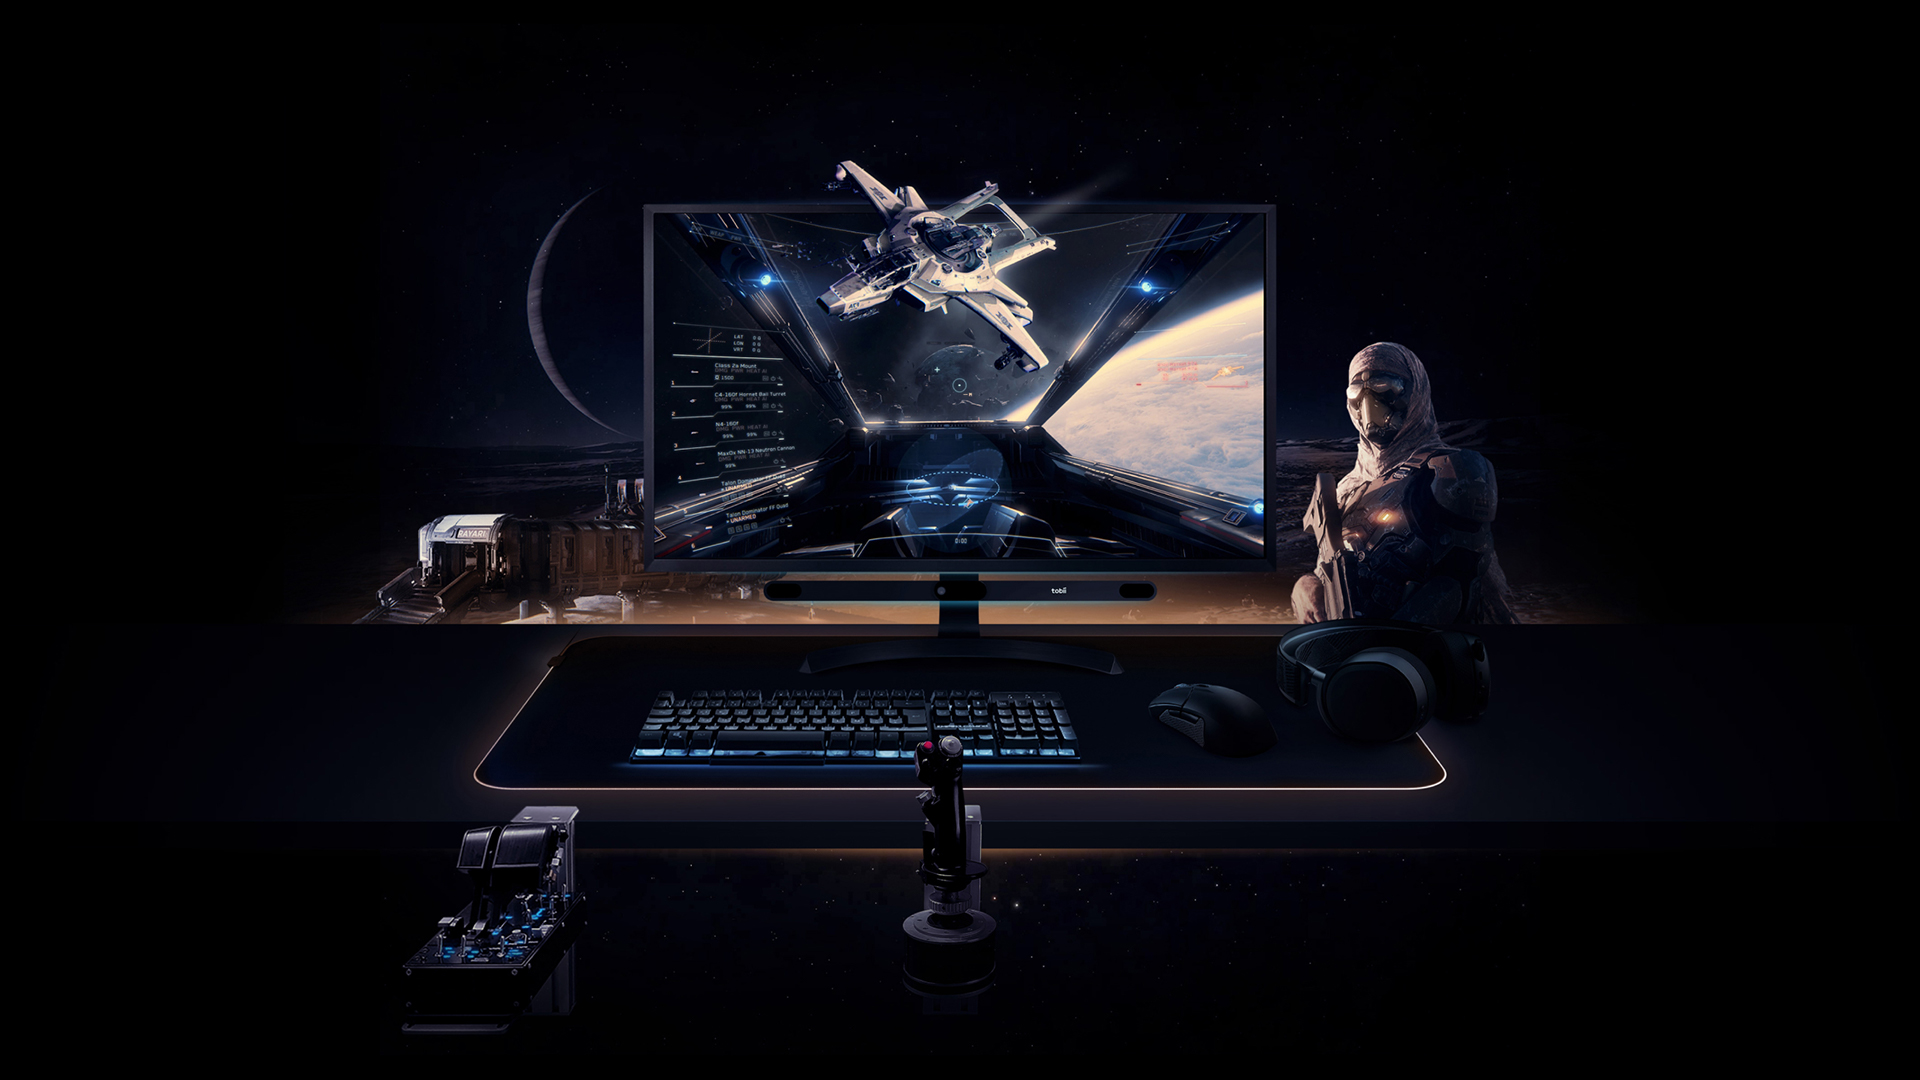 Tobii Gaming | The Next Generation of Head and Eye Tracking